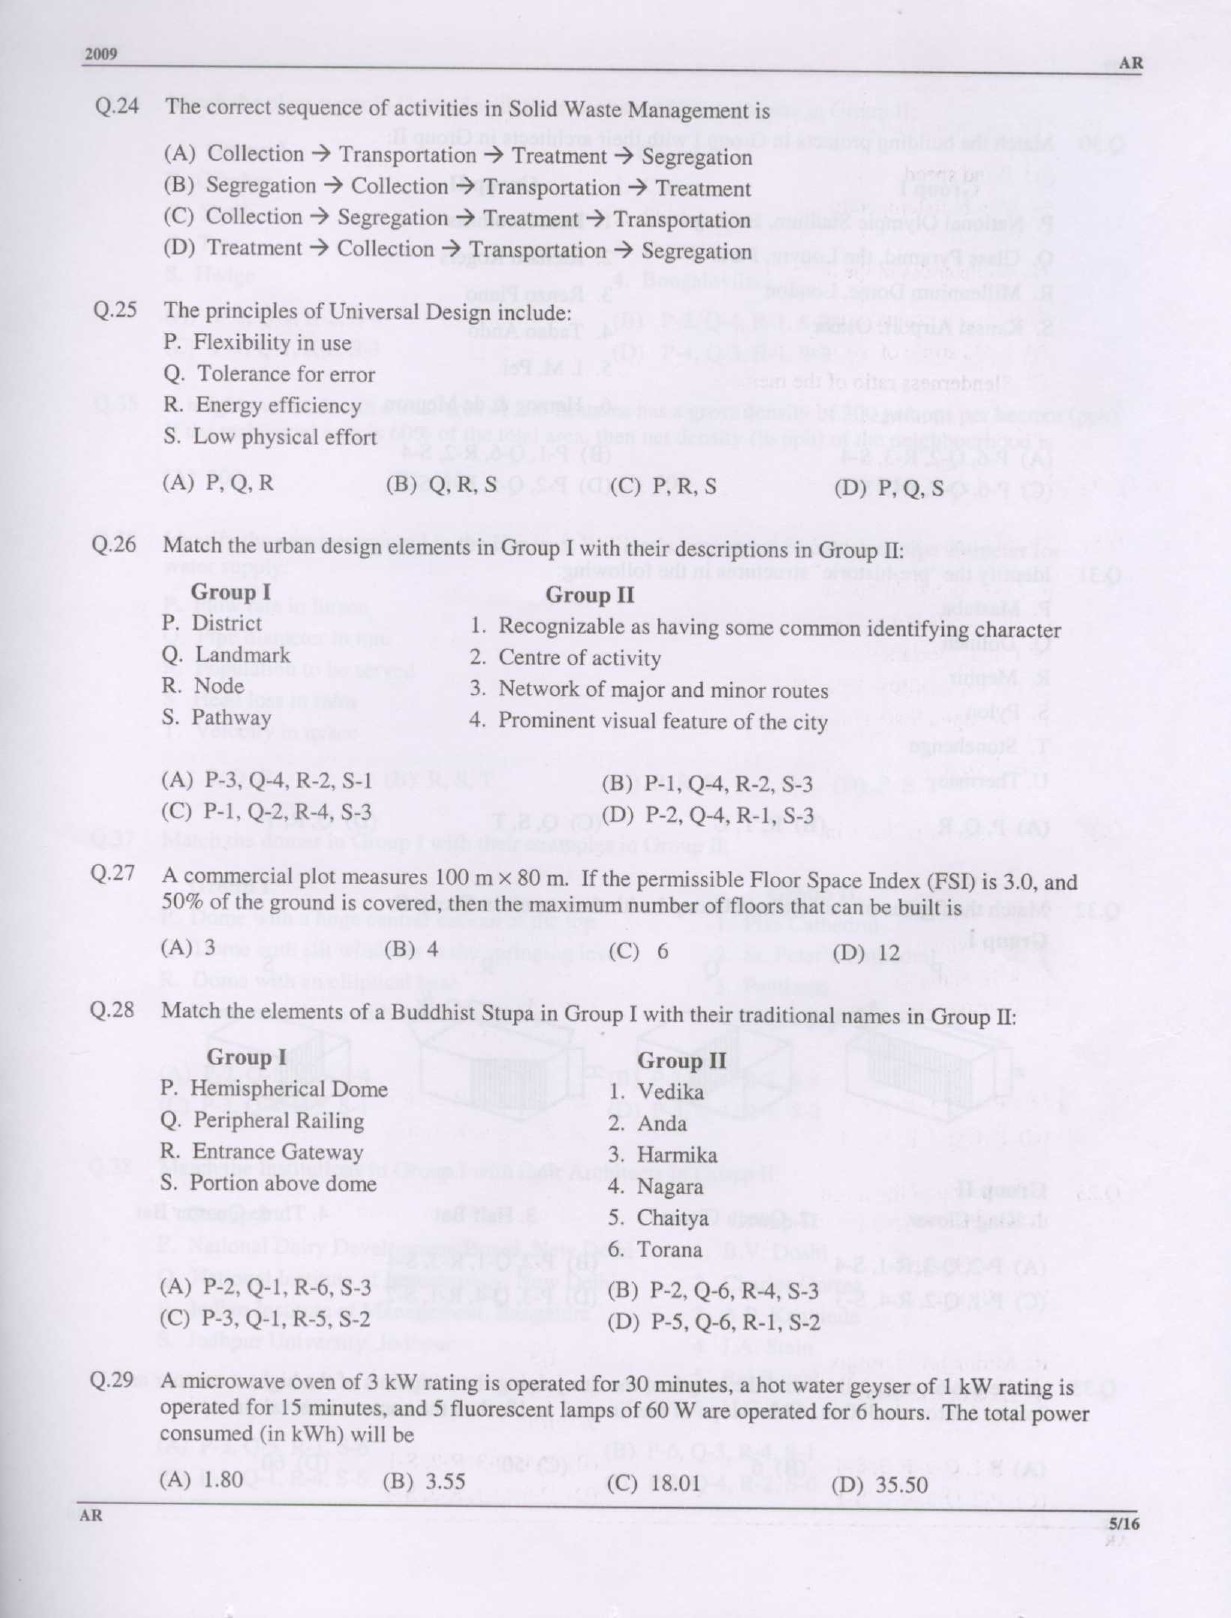 GATE Exam Question Paper 2009 Architecture and Planning 5